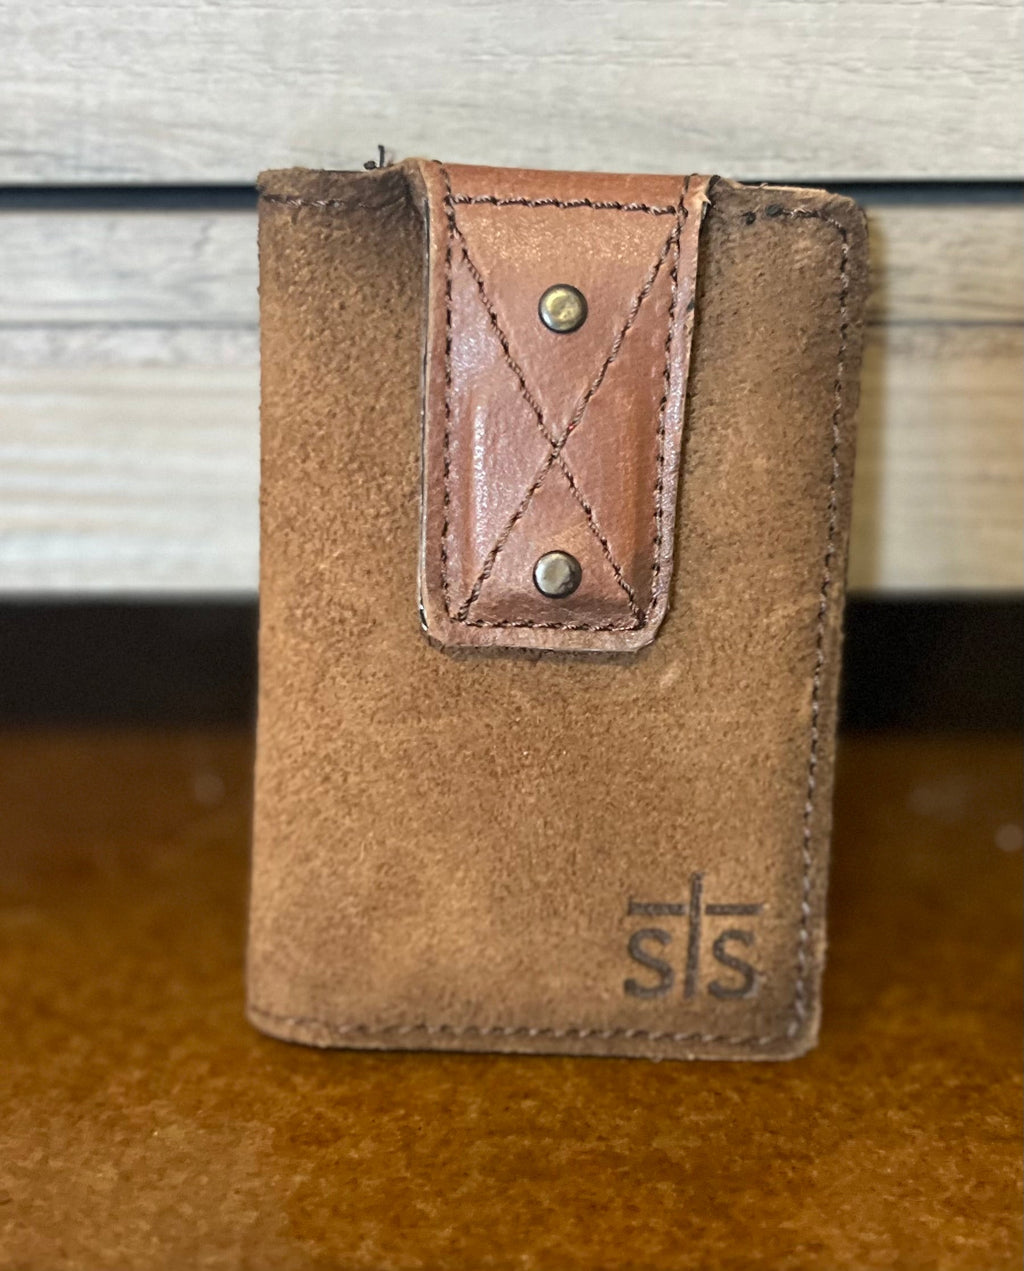 Ranchy Life foreman genuine leather money clip from sTs ranchwear